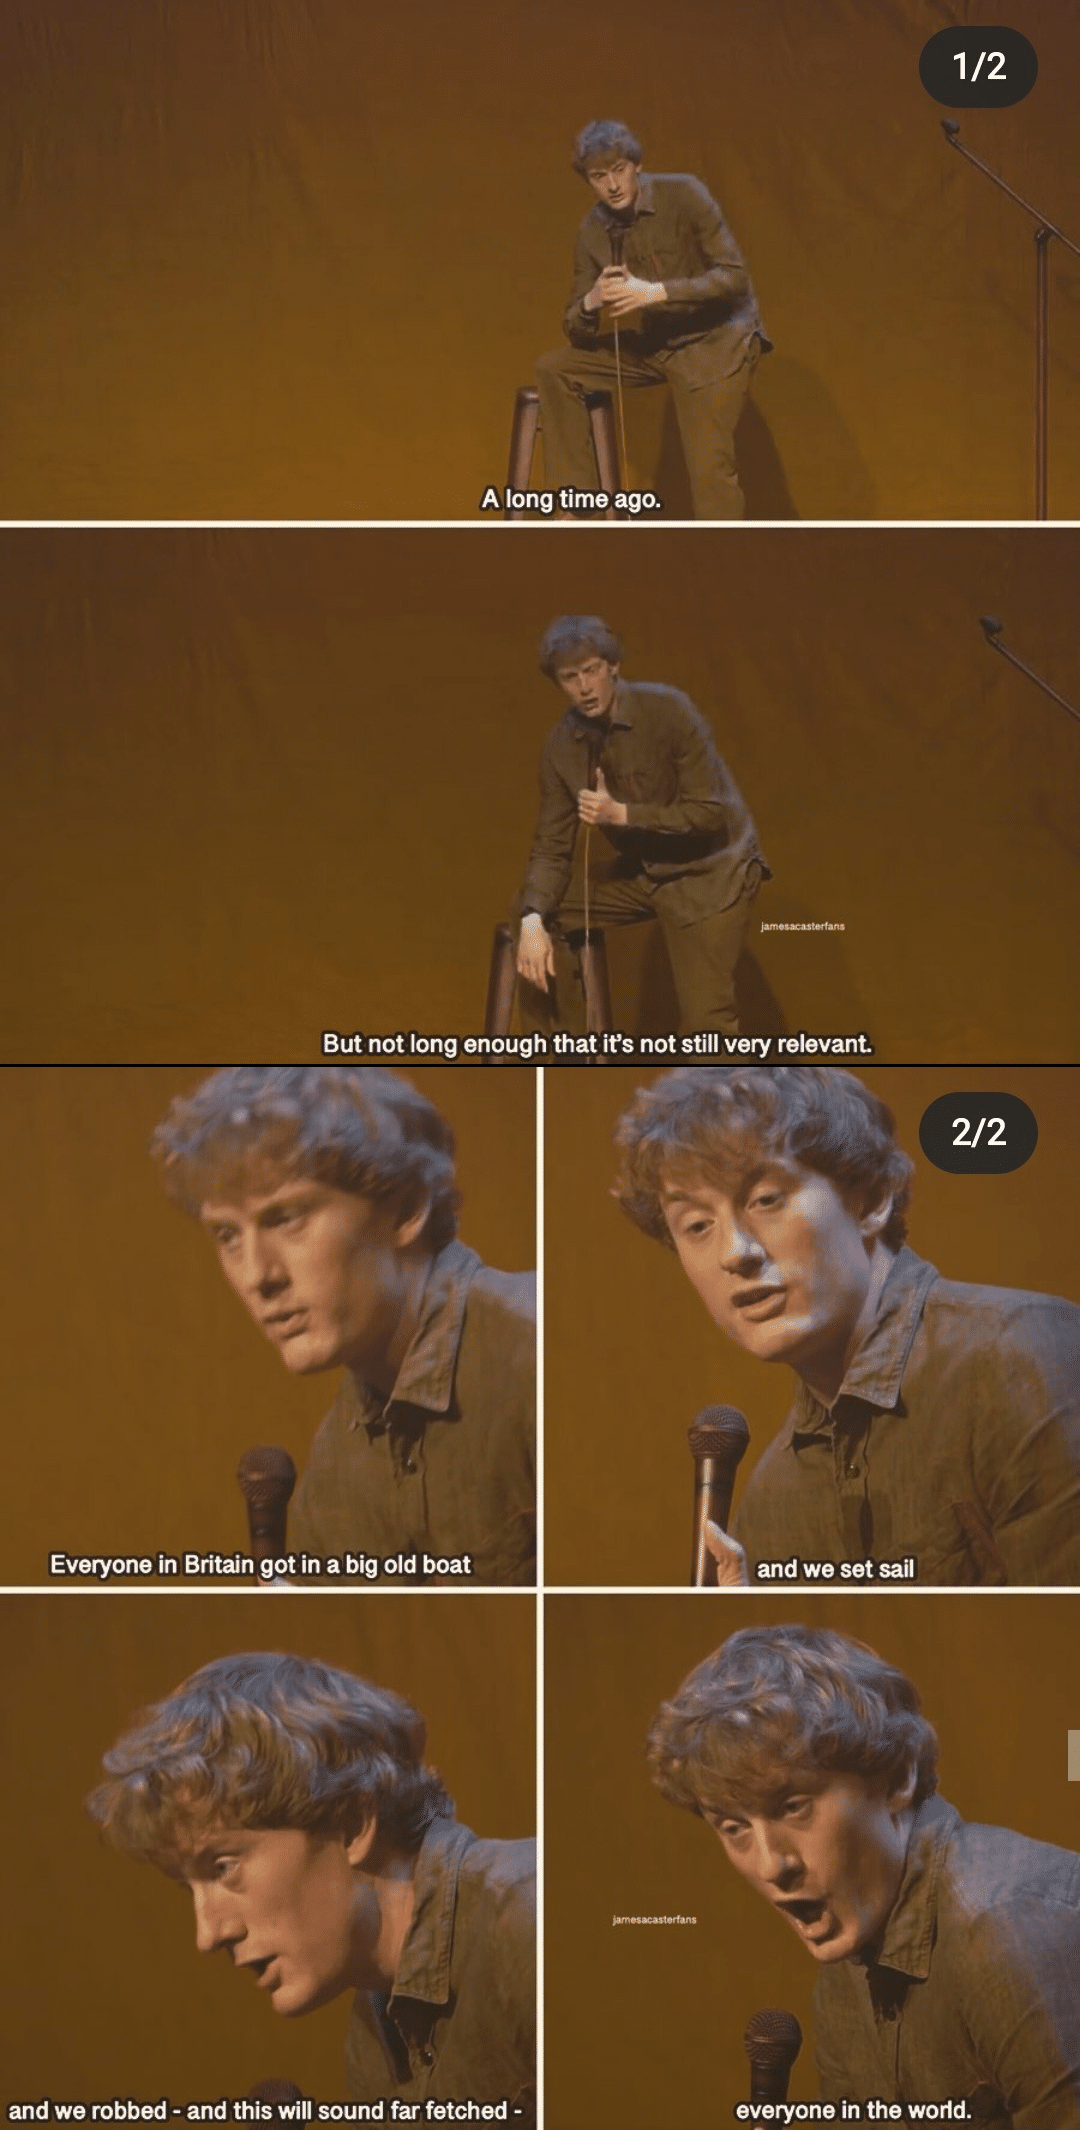 History, James Acaster, Acaster, Instagram, SW6, PkUvArJY History Memes History, James Acaster, Acaster, Instagram, SW6, PkUvArJY text: 1/2 A long time ago. But not long enough that it's not still very relevant. Everyone in Britain got in a big old boat and we robbed - and this will sound far fetched - 2/2 and we set sail everyone in the world. 